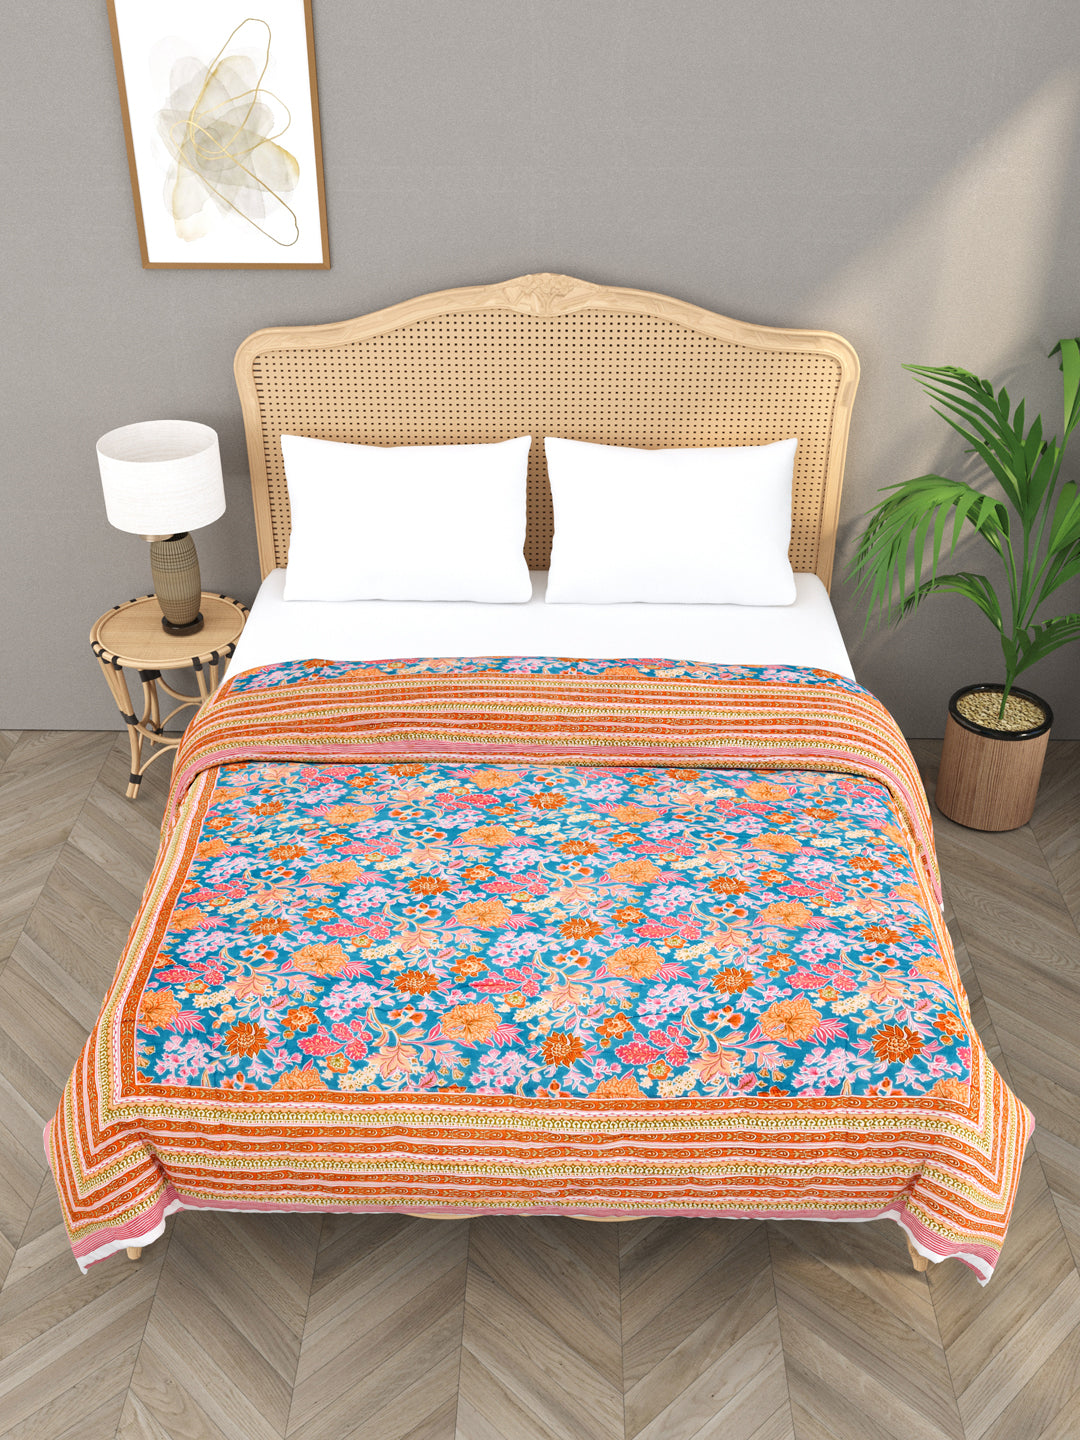 Floral Printed  Reversible Double Bed Cotton Quilt with cotton filling